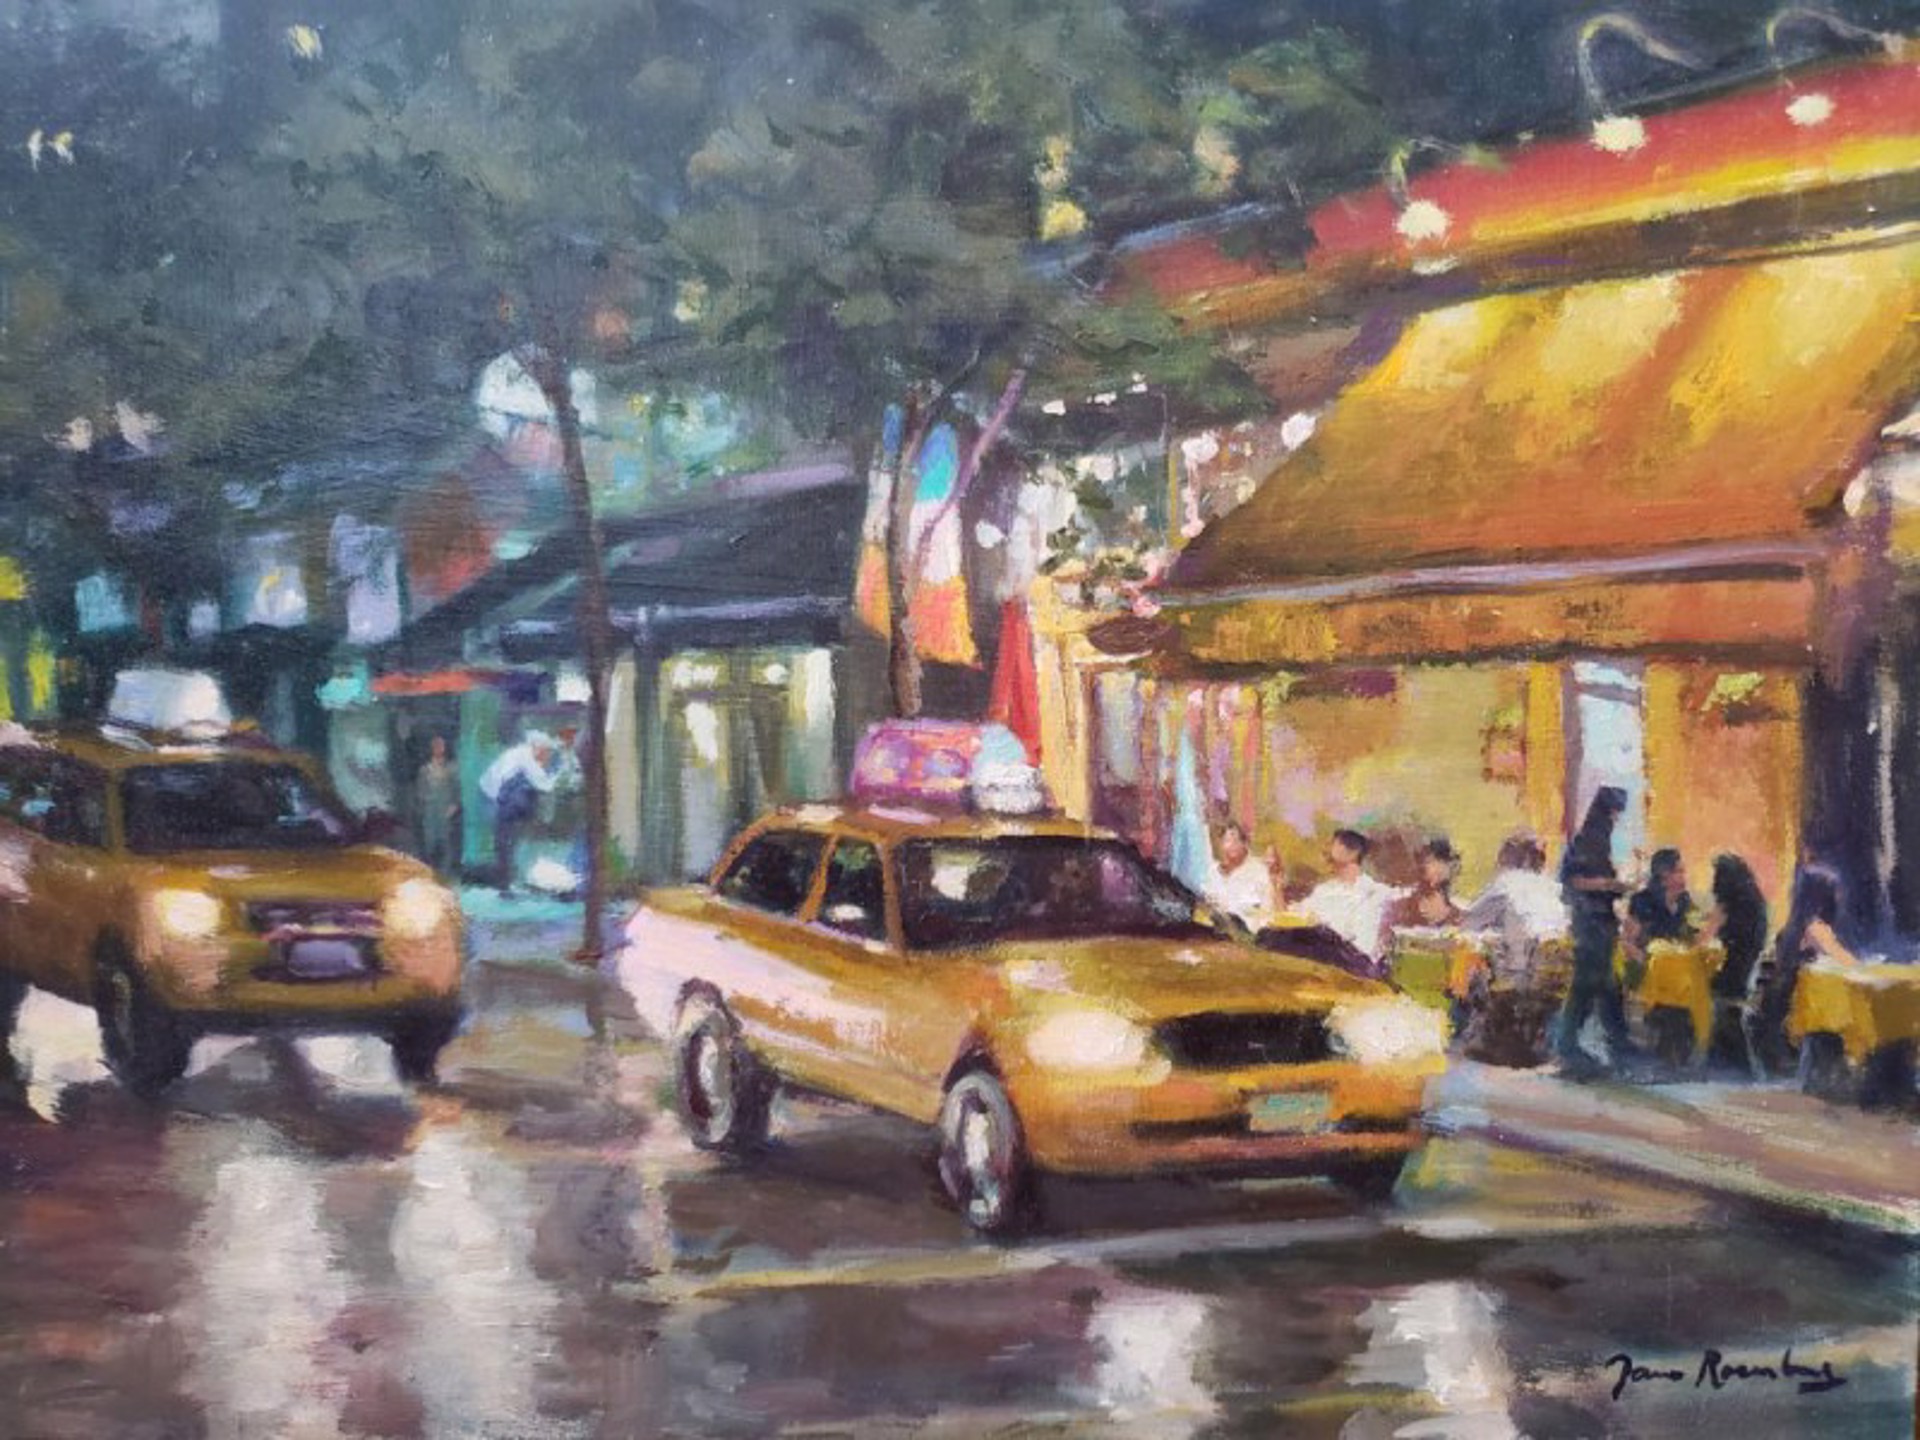 Taxis at Night, West Village by Jane Rosenberg